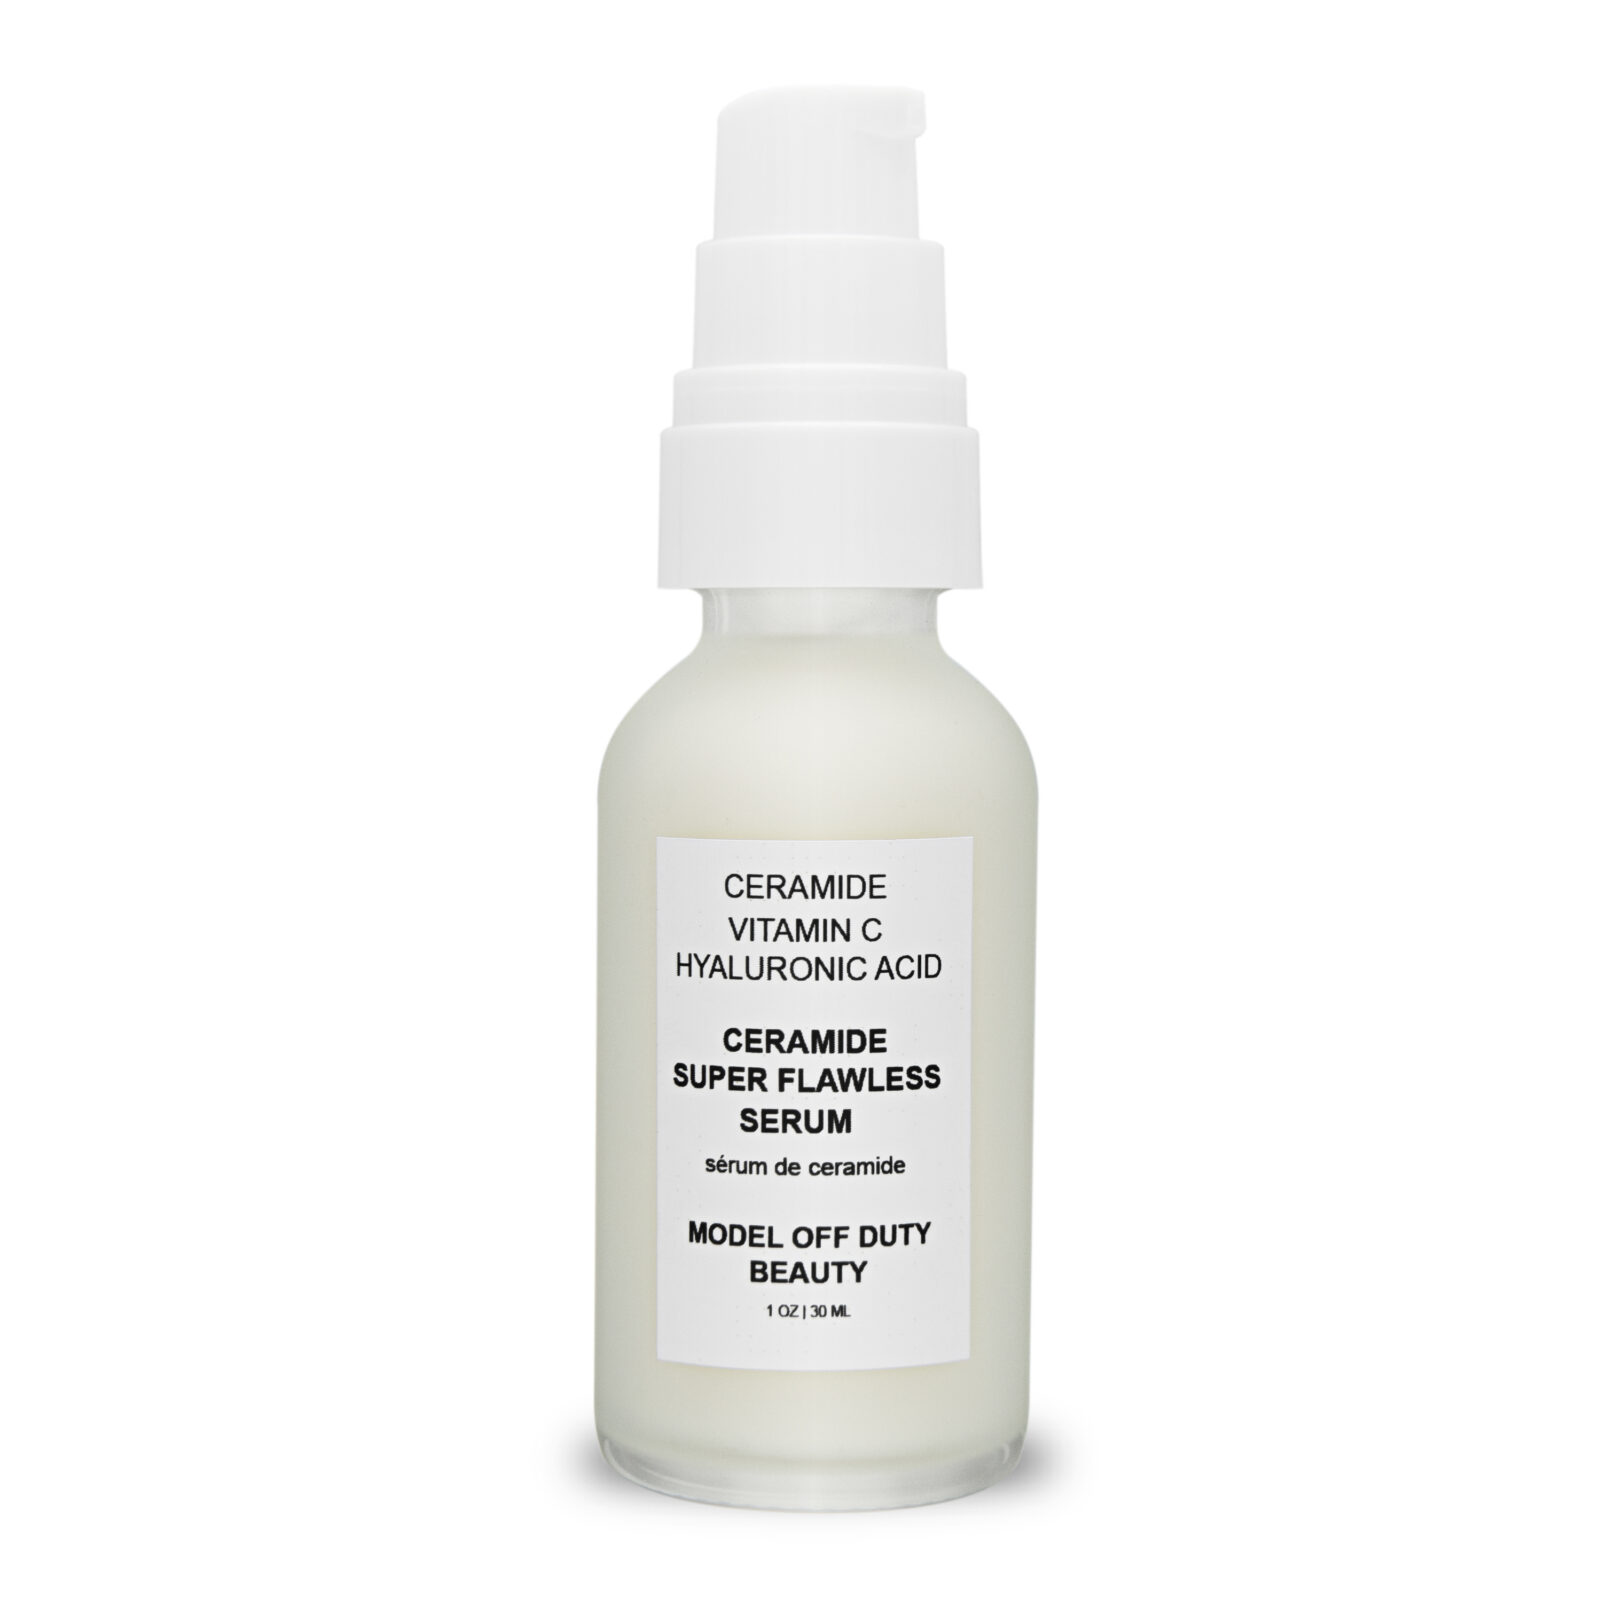 hyaluronic acid product for skin benefits